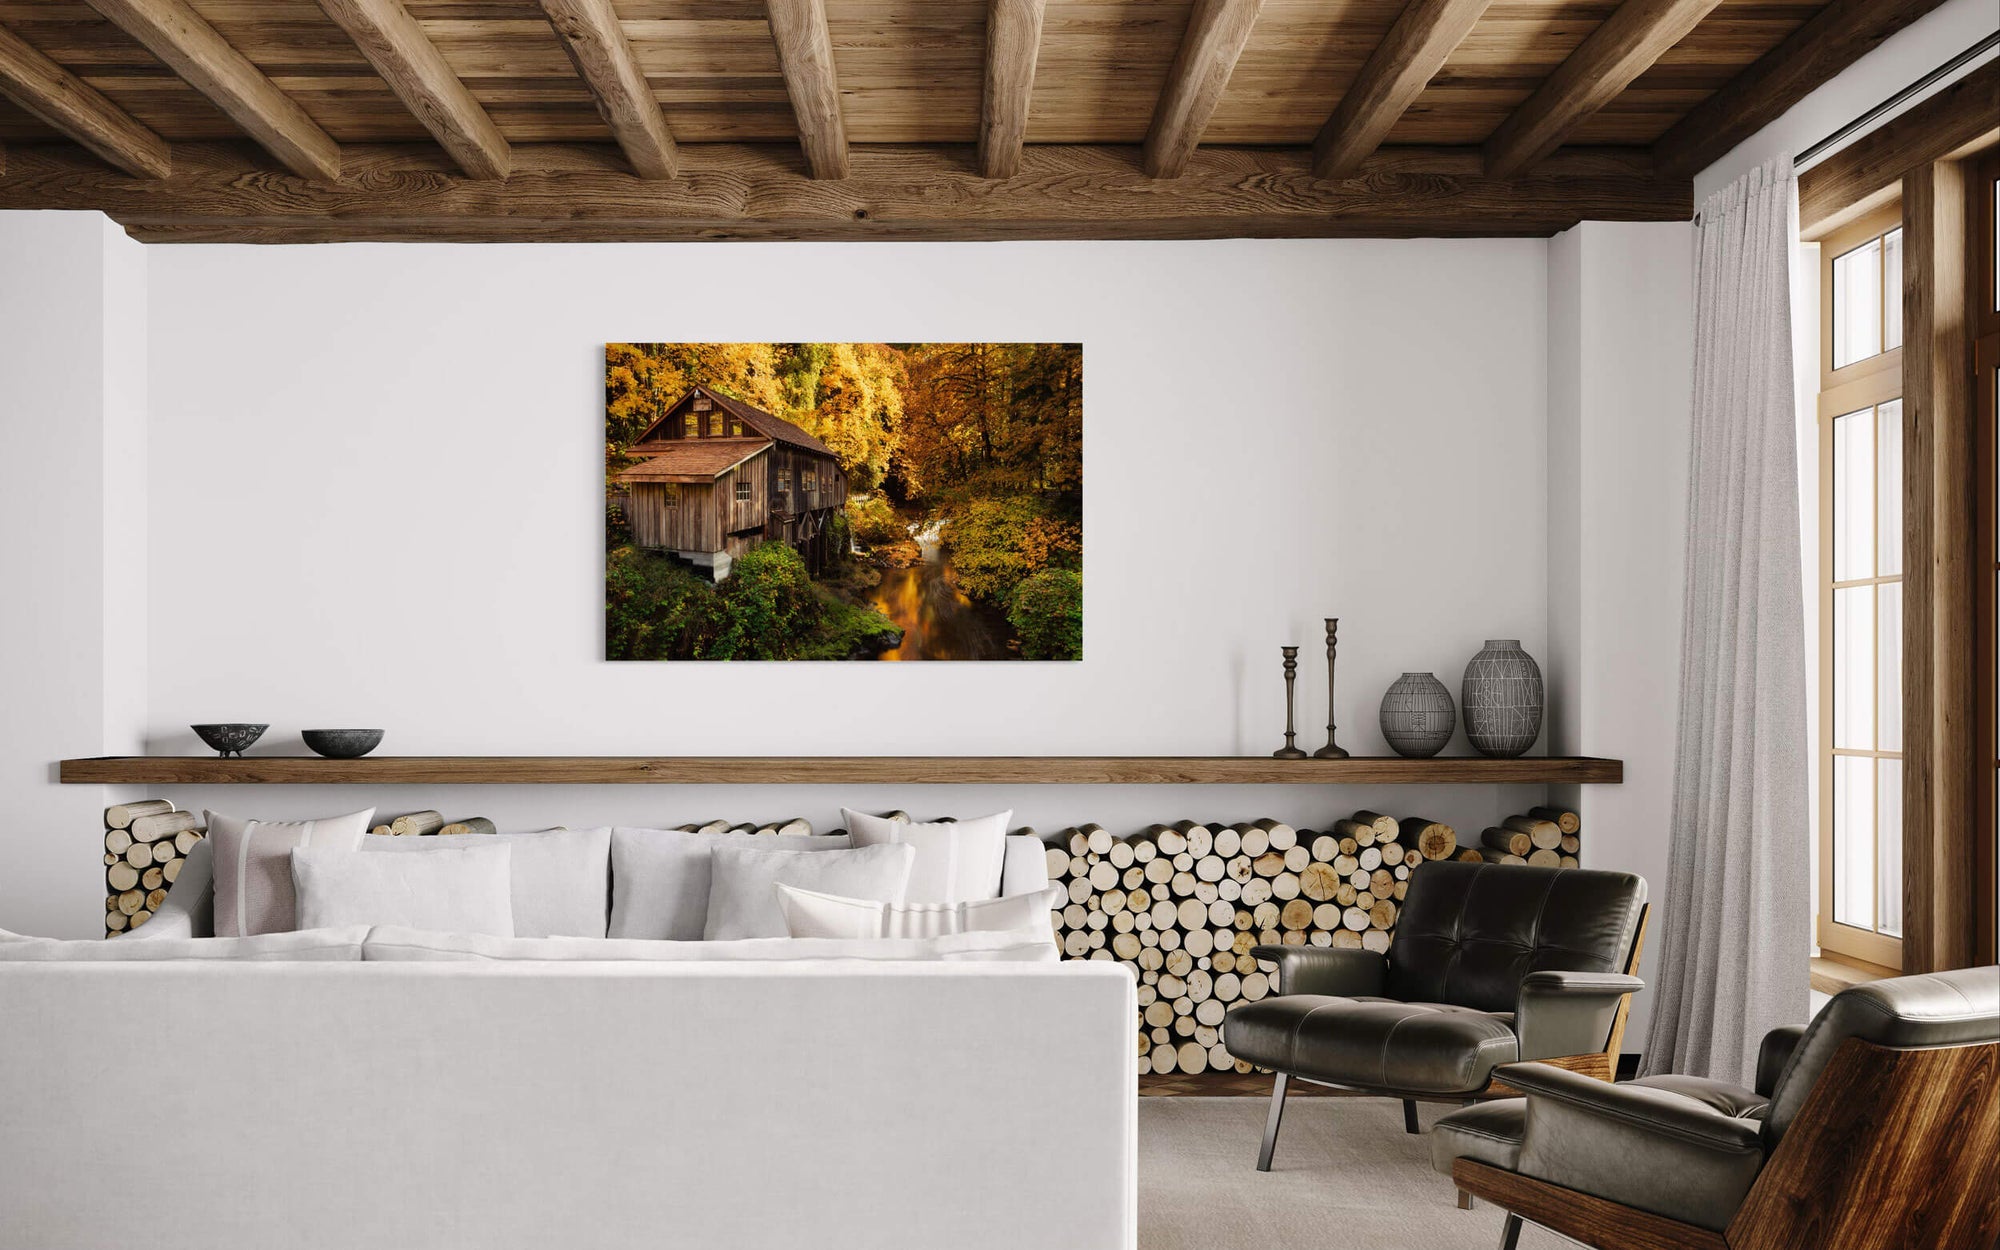 This Washington artwork hanging in a living room shows the Cedar Creek Grist Mill in Woodland.